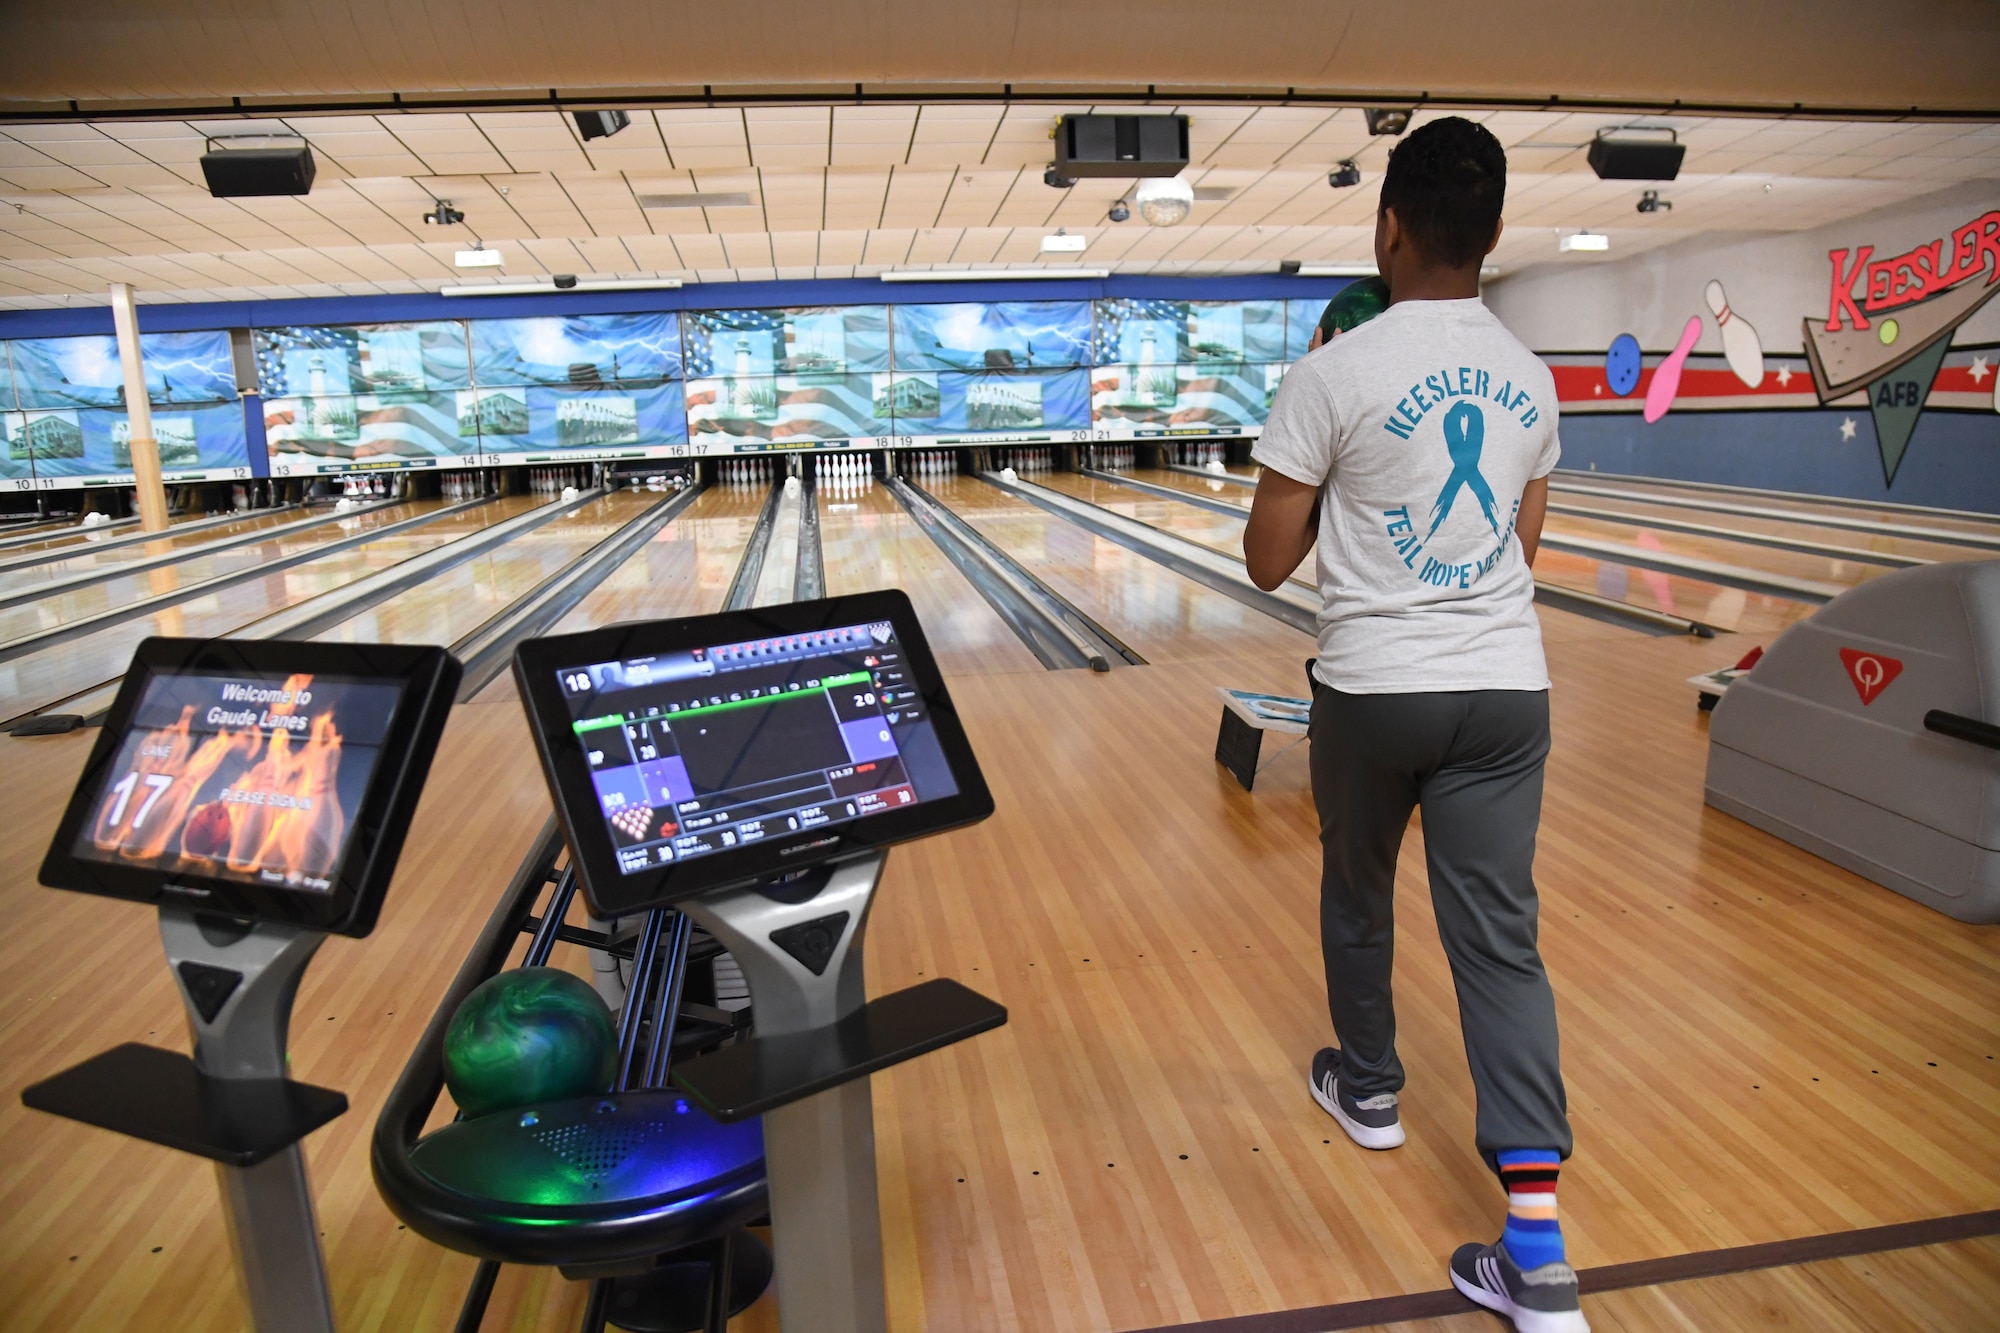 U.S. Air Force Airman Xavier Williams, 338th Training Squadron student, bowls during the Strike Out Sexual Assault Bowling Tournament inside Gaude Lanes at Keesler Air Force Base, Mississippi, April 1, 2022. The event was held in awareness of Sexual Assault and Awareness Prevention Month which is recognized throughout April. (U.S. Air Force photo by Kemberly Groue)